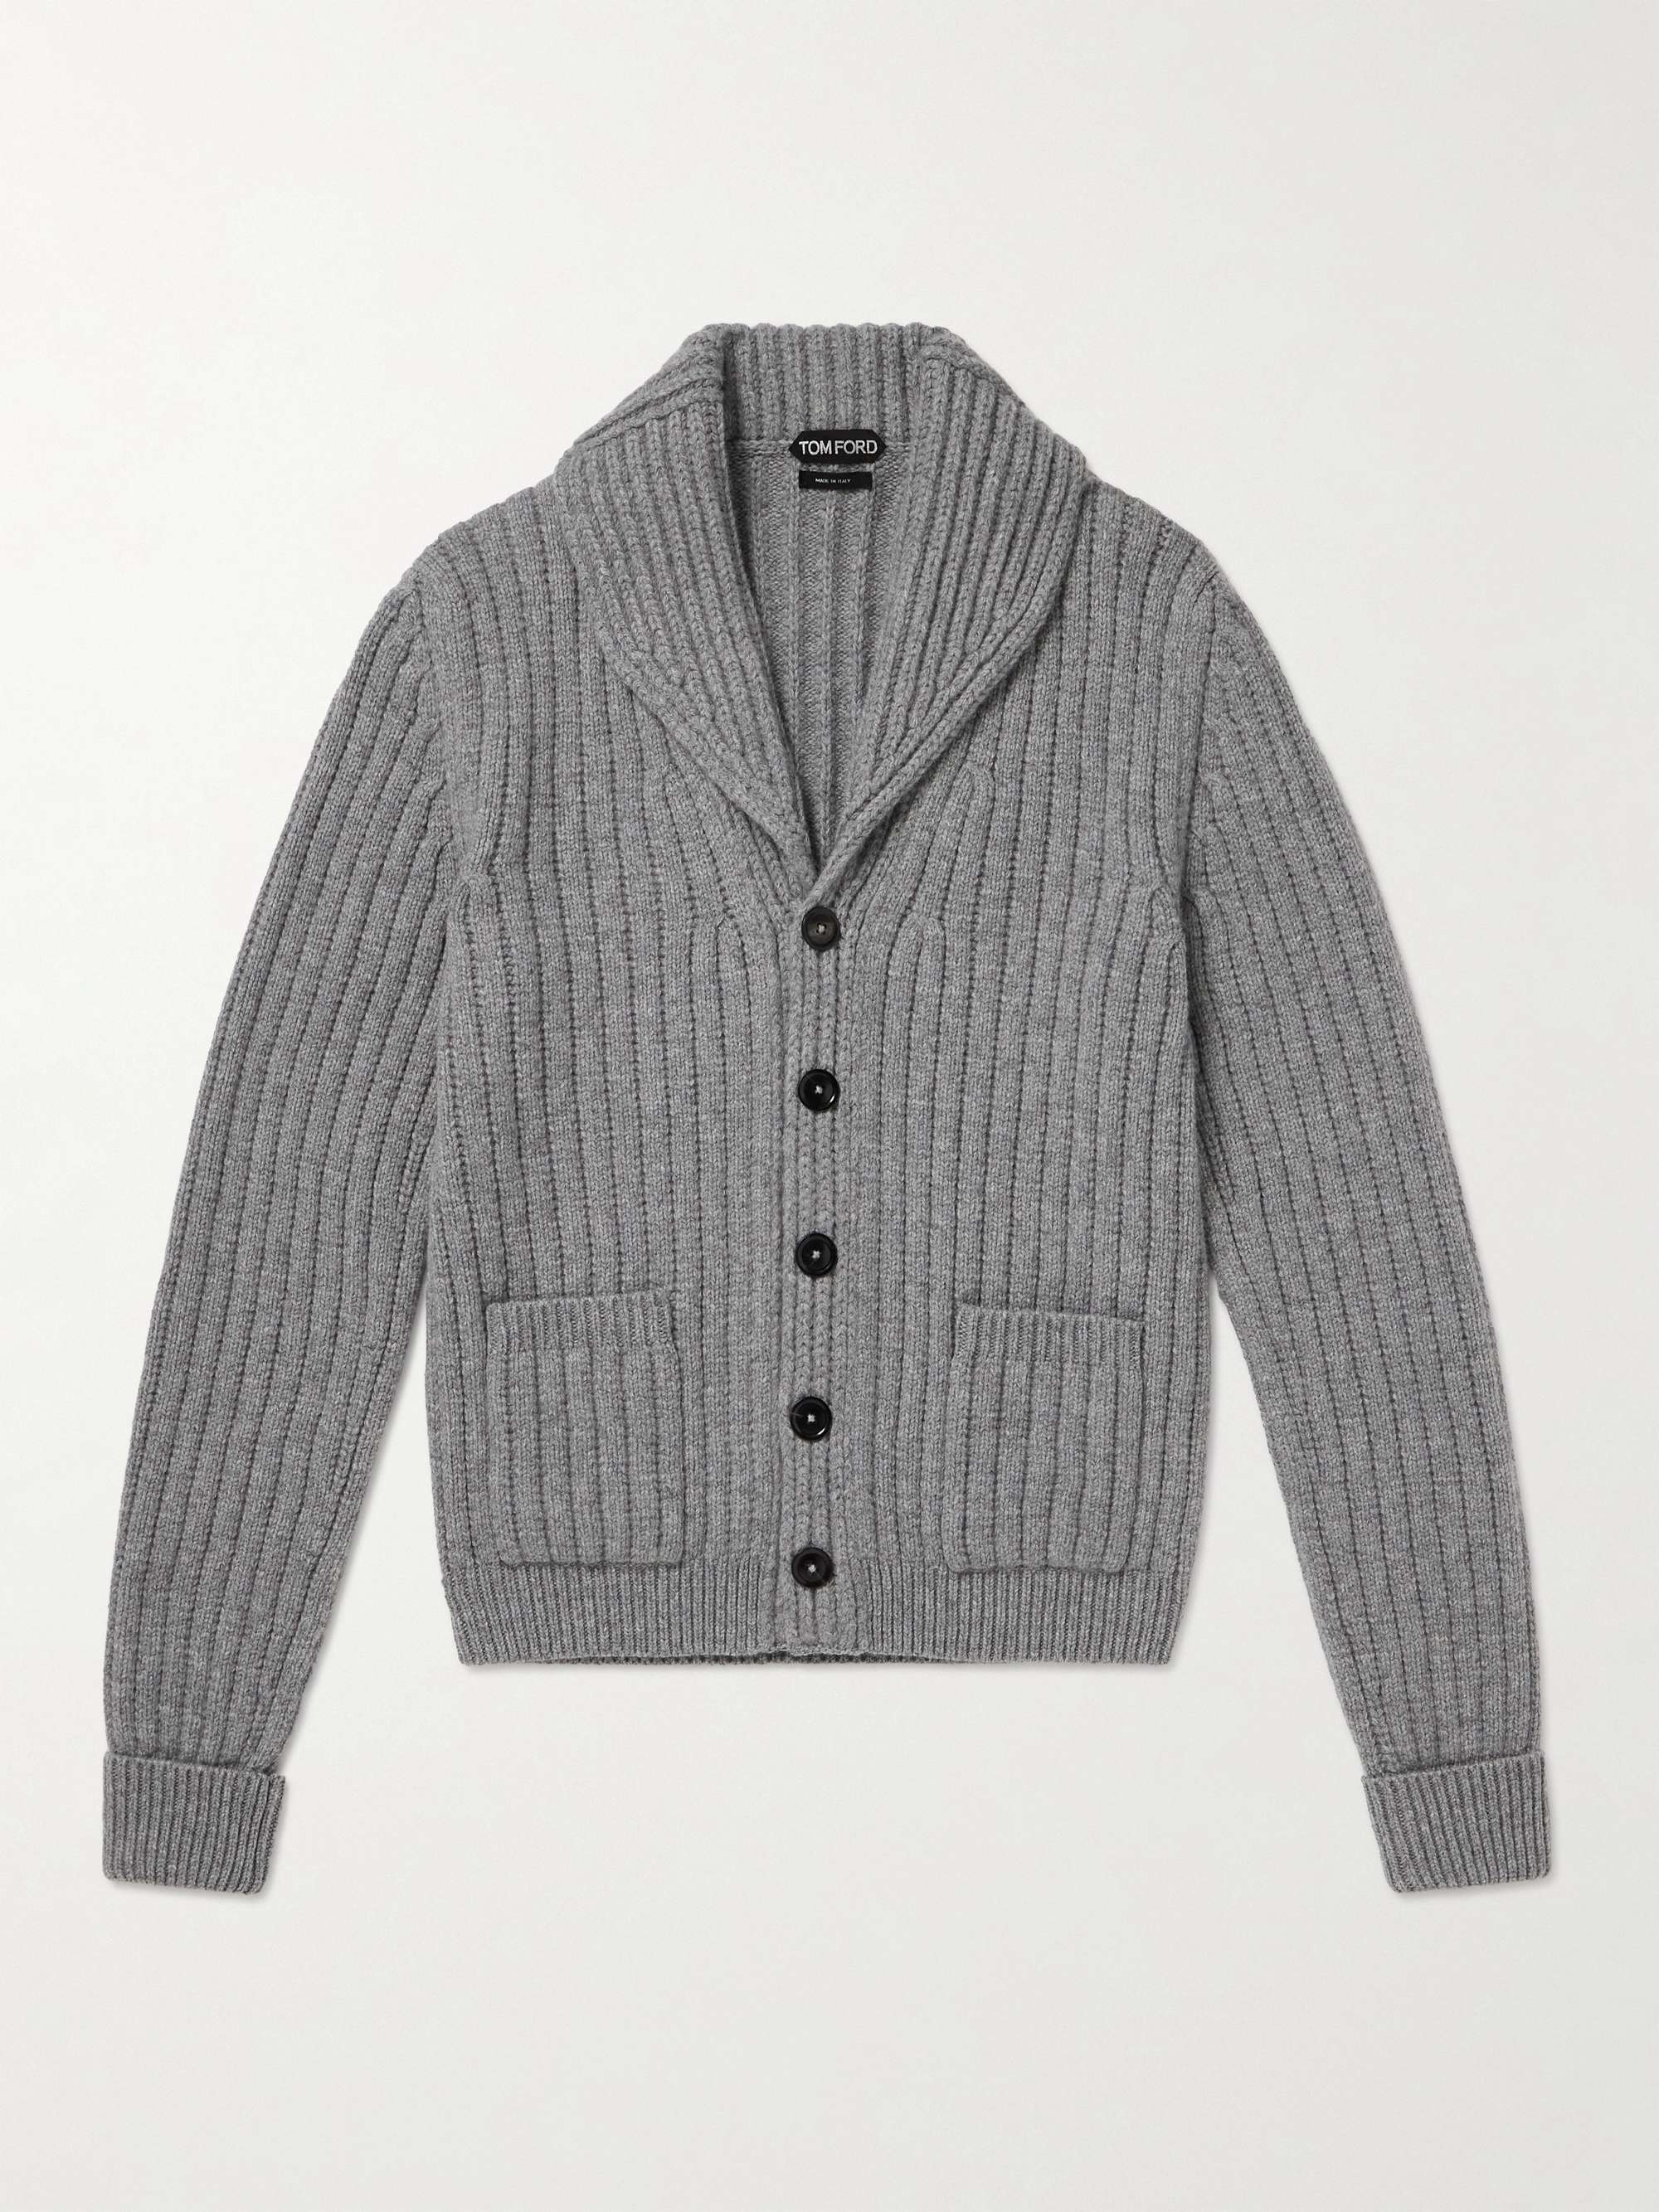 TOM FORD Shawl-Collar Ribbed Wool and Cashmere-Blend Cardigan for Men ...